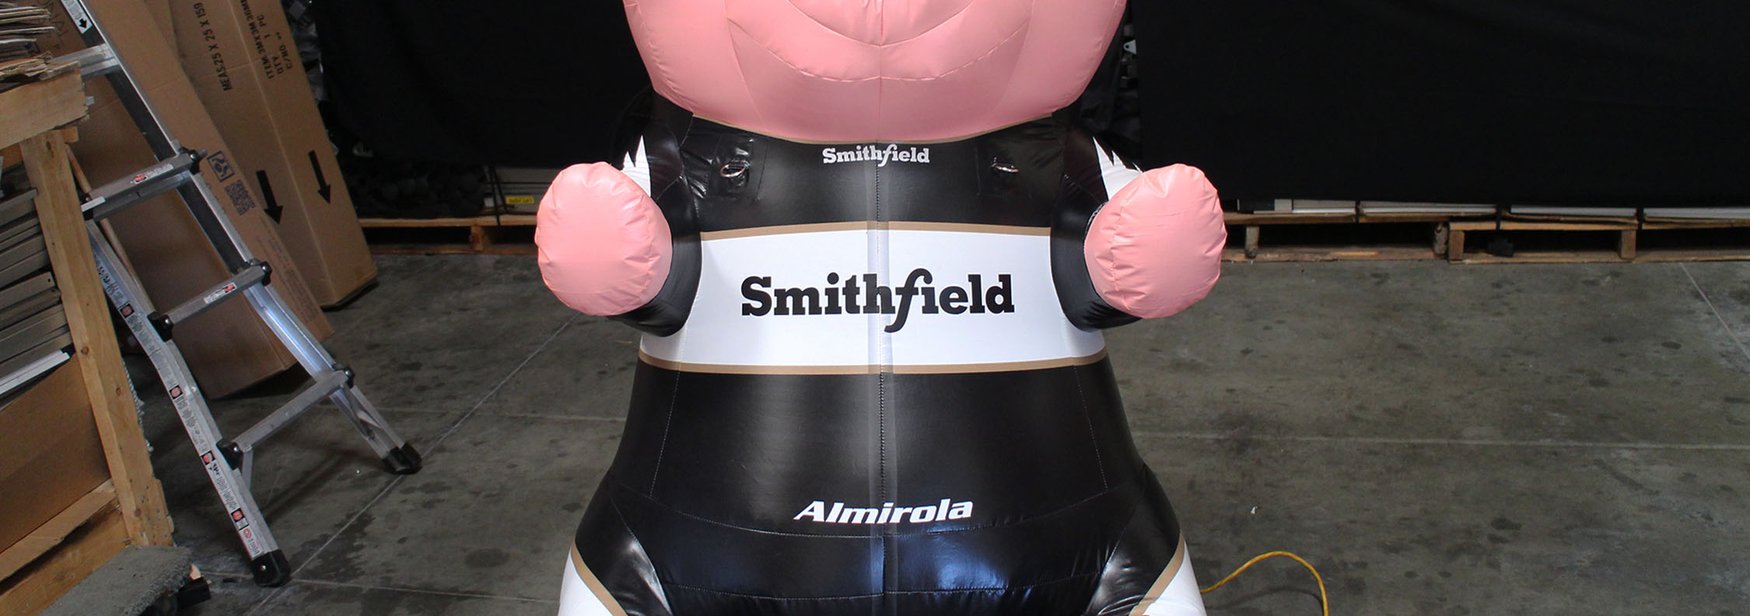 smithfield-pig-inflatable